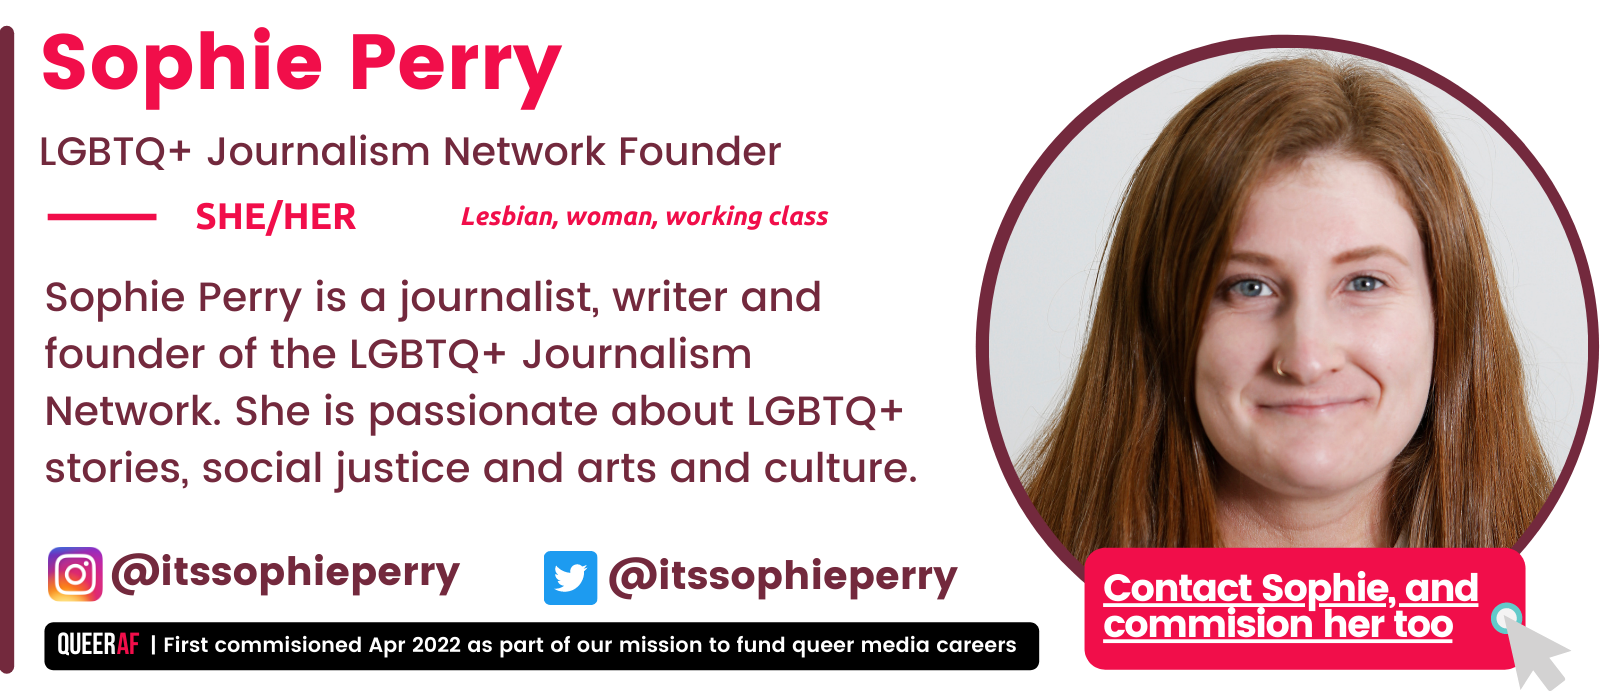   Sophie Perry is a journalist, writer and founder of the LGBTQ+ Journalism Network. She is passionate about LGBTQ+ stories, social justice and arts and culture.   SHE/HER Lesbian, woman, working class  Sophie Perry LGBTQ+ Journalism Network Founder